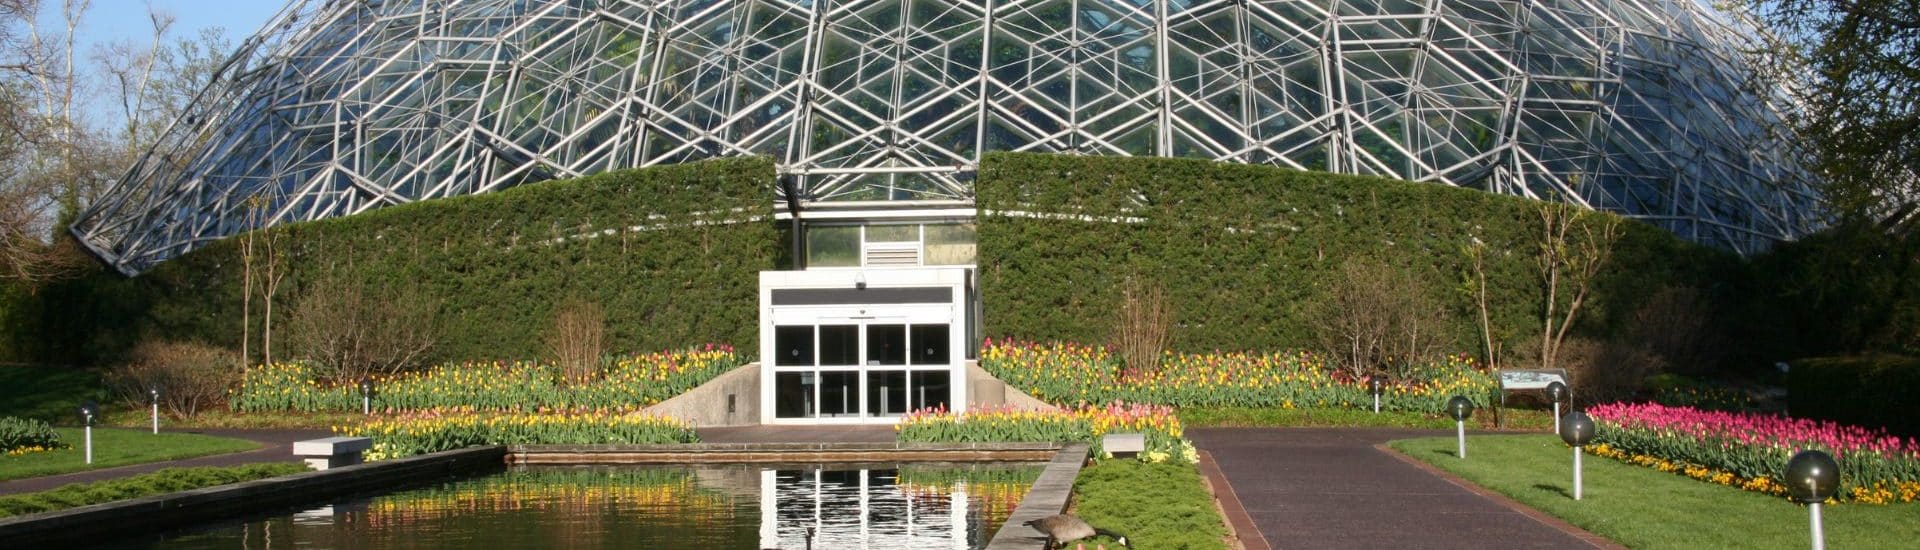 Large, white Climatron Geodesic Dome Conservatory surrounded by plants, flowers and trees.